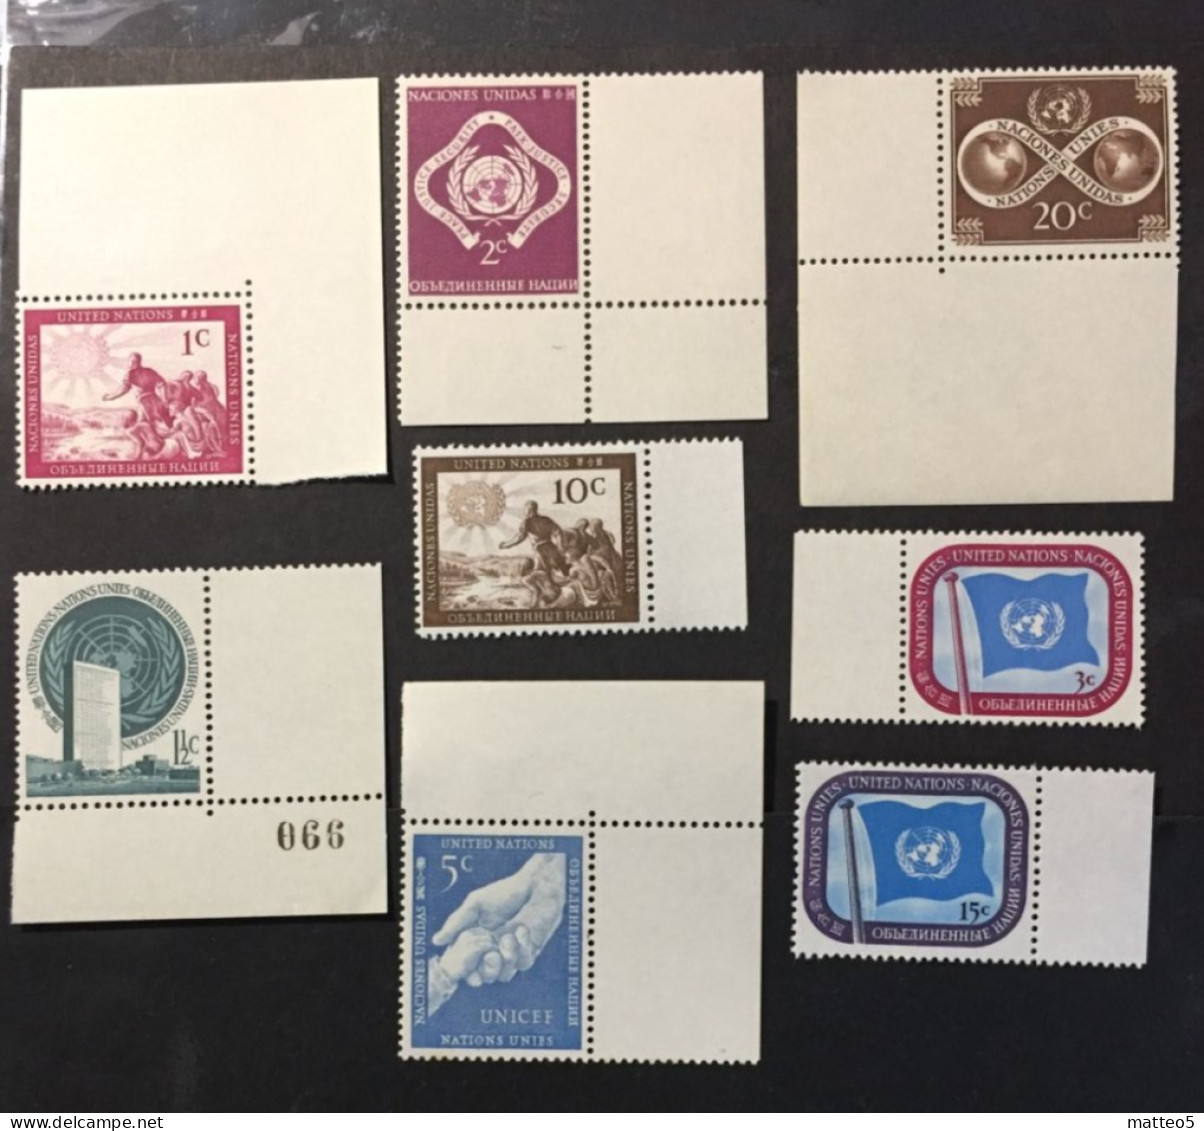 1951 - United Nations UNO UN ONU - 8 Stamps Of The Year 1951 -  Unused - Nuovi